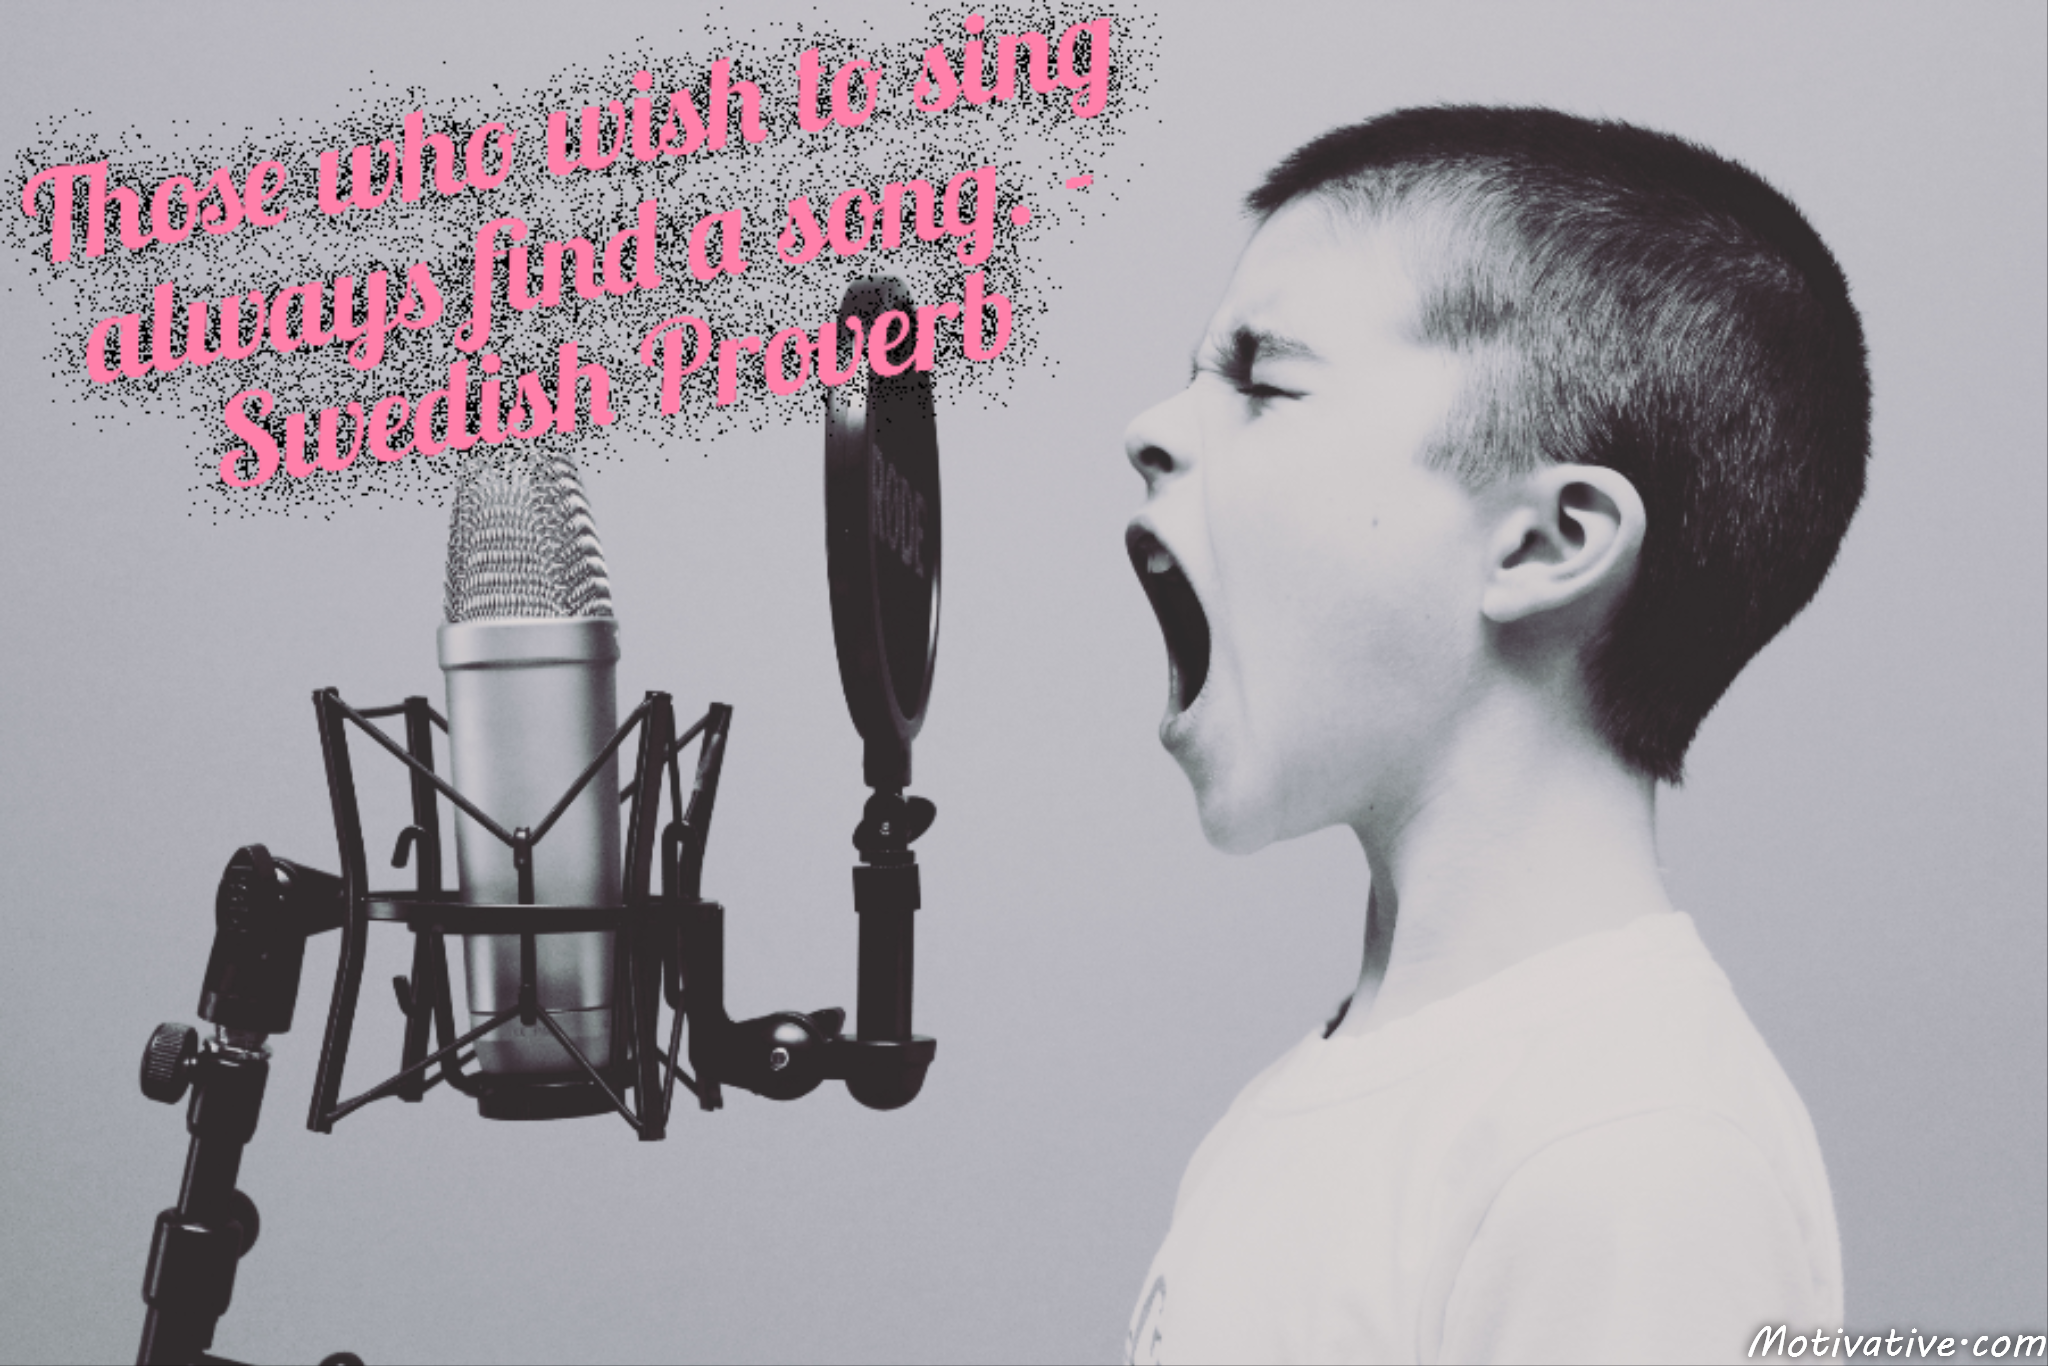 Those who wish to sing always find a song. – Swedish Proverb